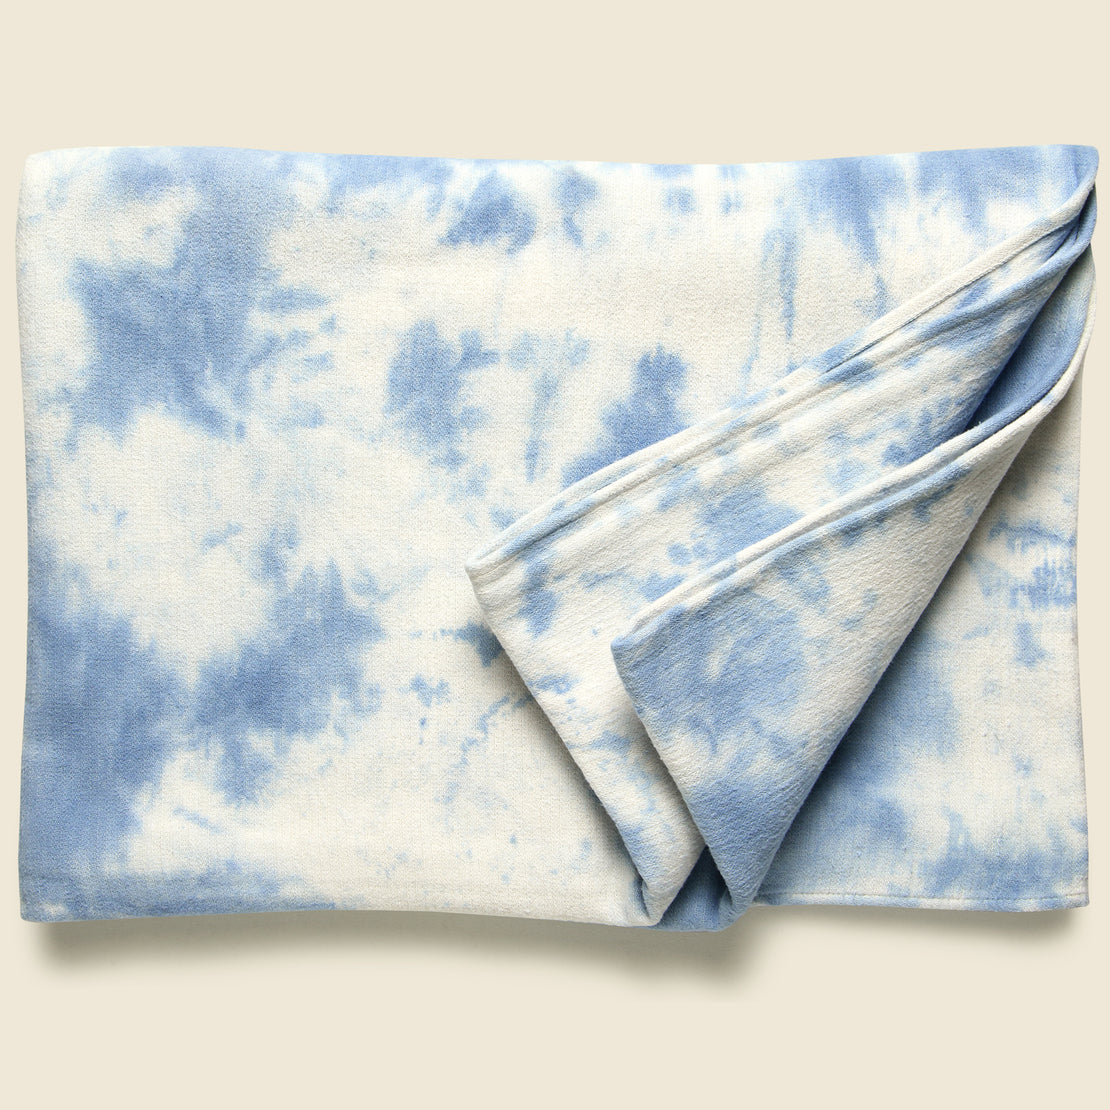 Tie-Dye Blanket - Pacific Mist - Faherty - STAG Provisions - Gift - Blankets